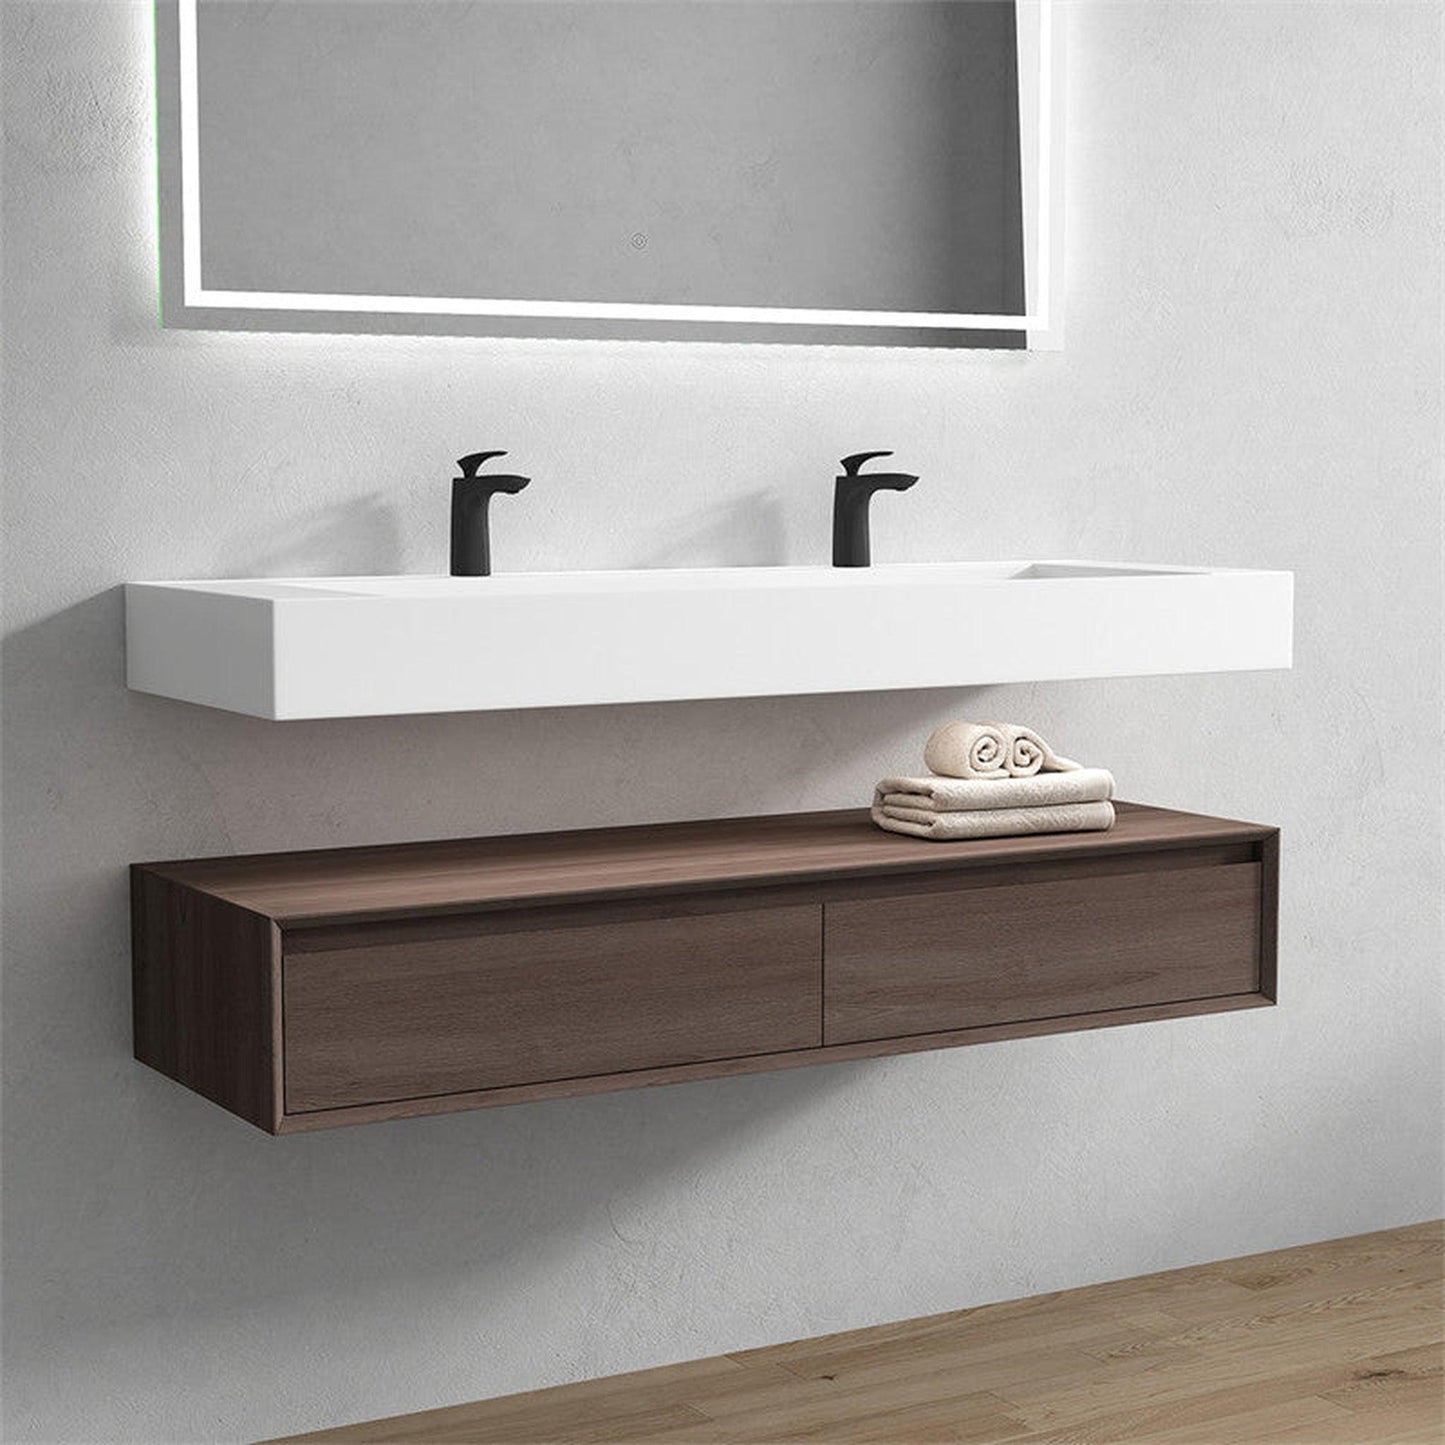 Moreno Bath ALYSA 60" Red Oak Floating Vanity With Double Faucet Holes and Reinforced White Acrylic Sink